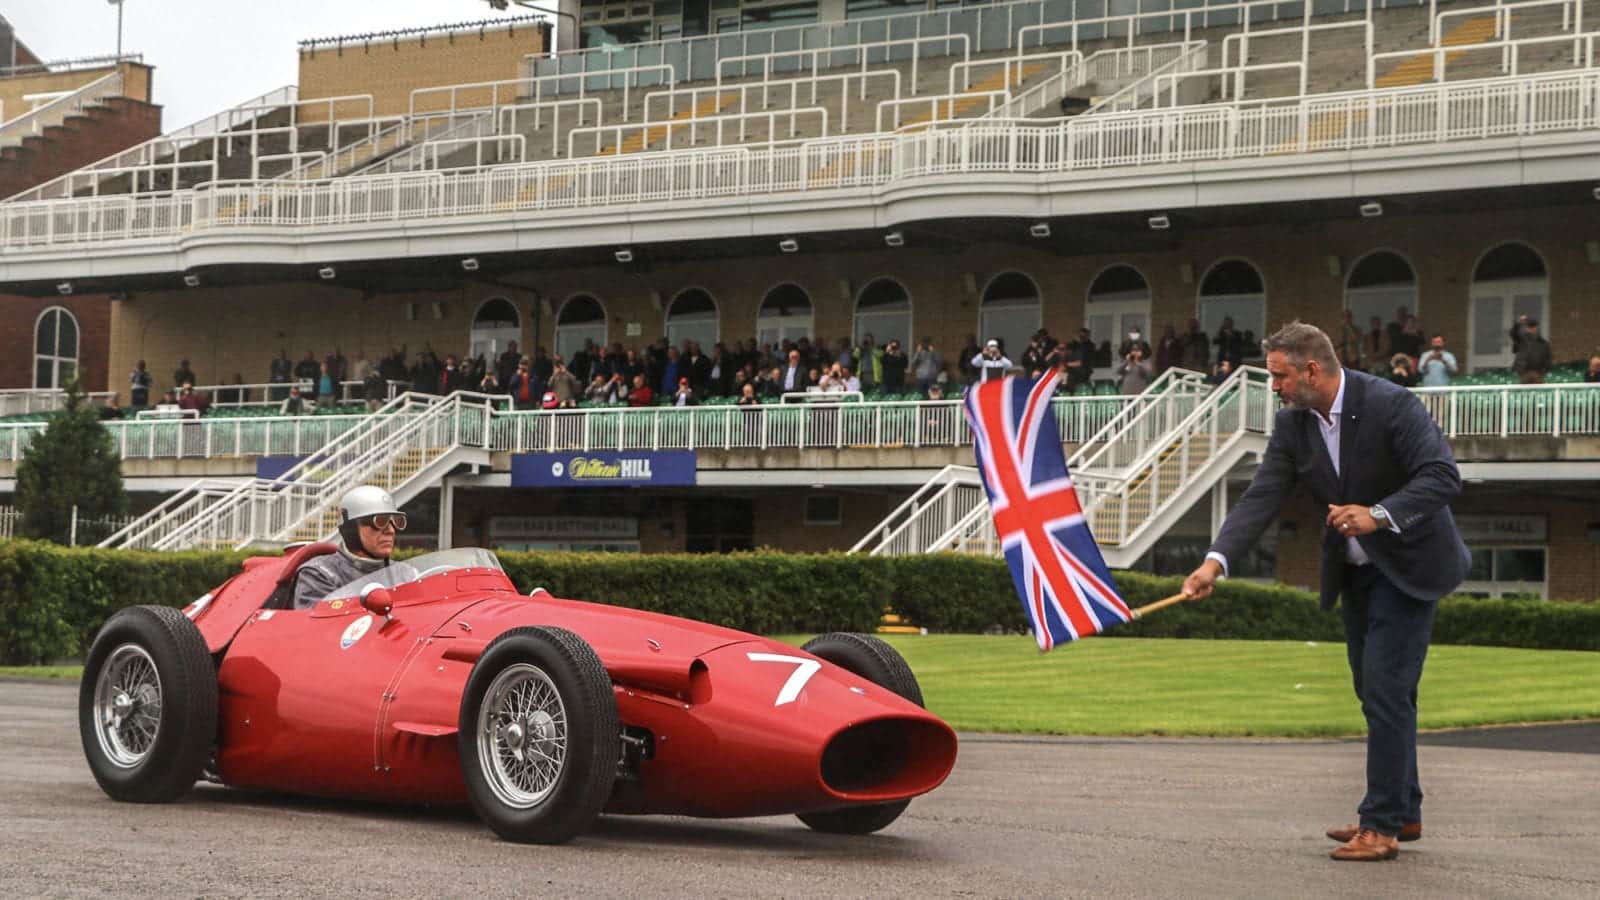 Rick Hall sets off at Aintree in Stirling Moss's Maserati 250F to commemorate his 1955 British GP win